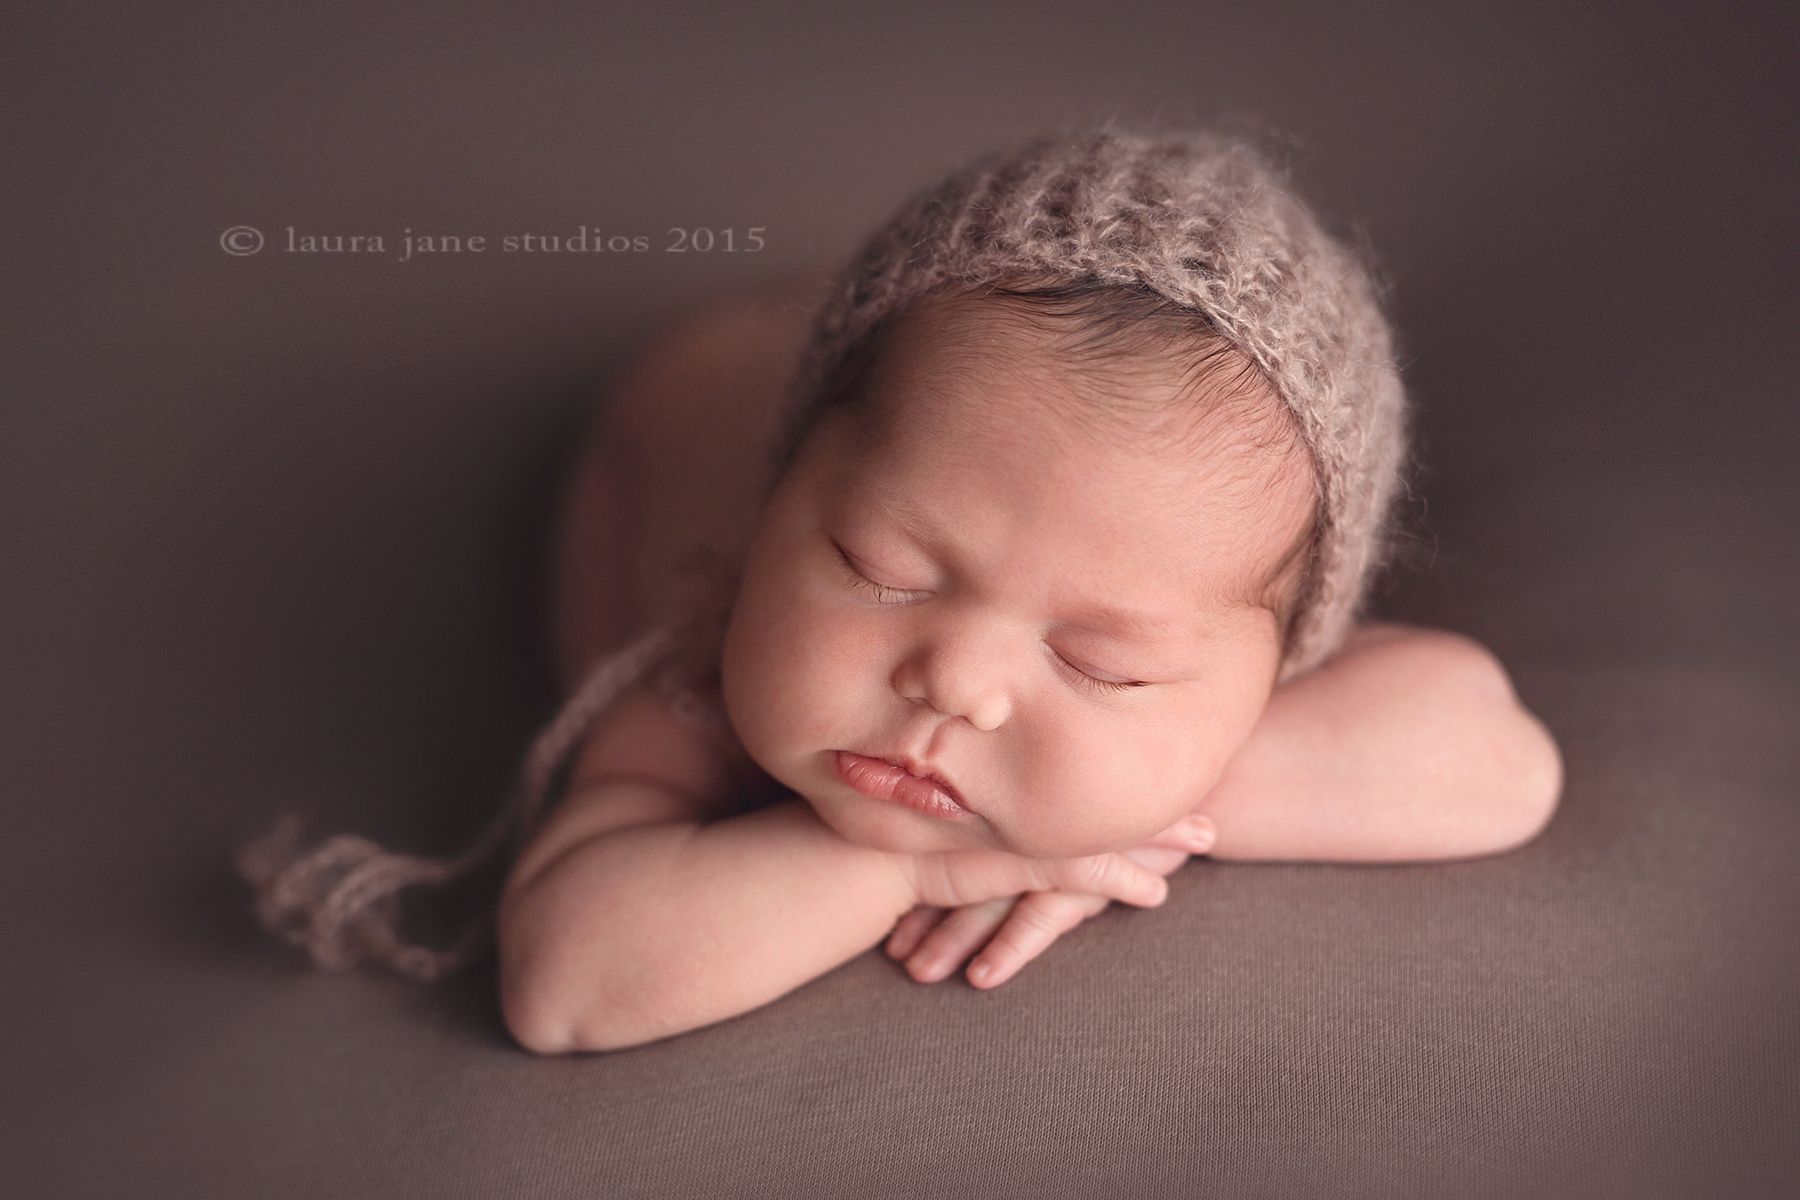 How to choose a photographer for newborn photography 2